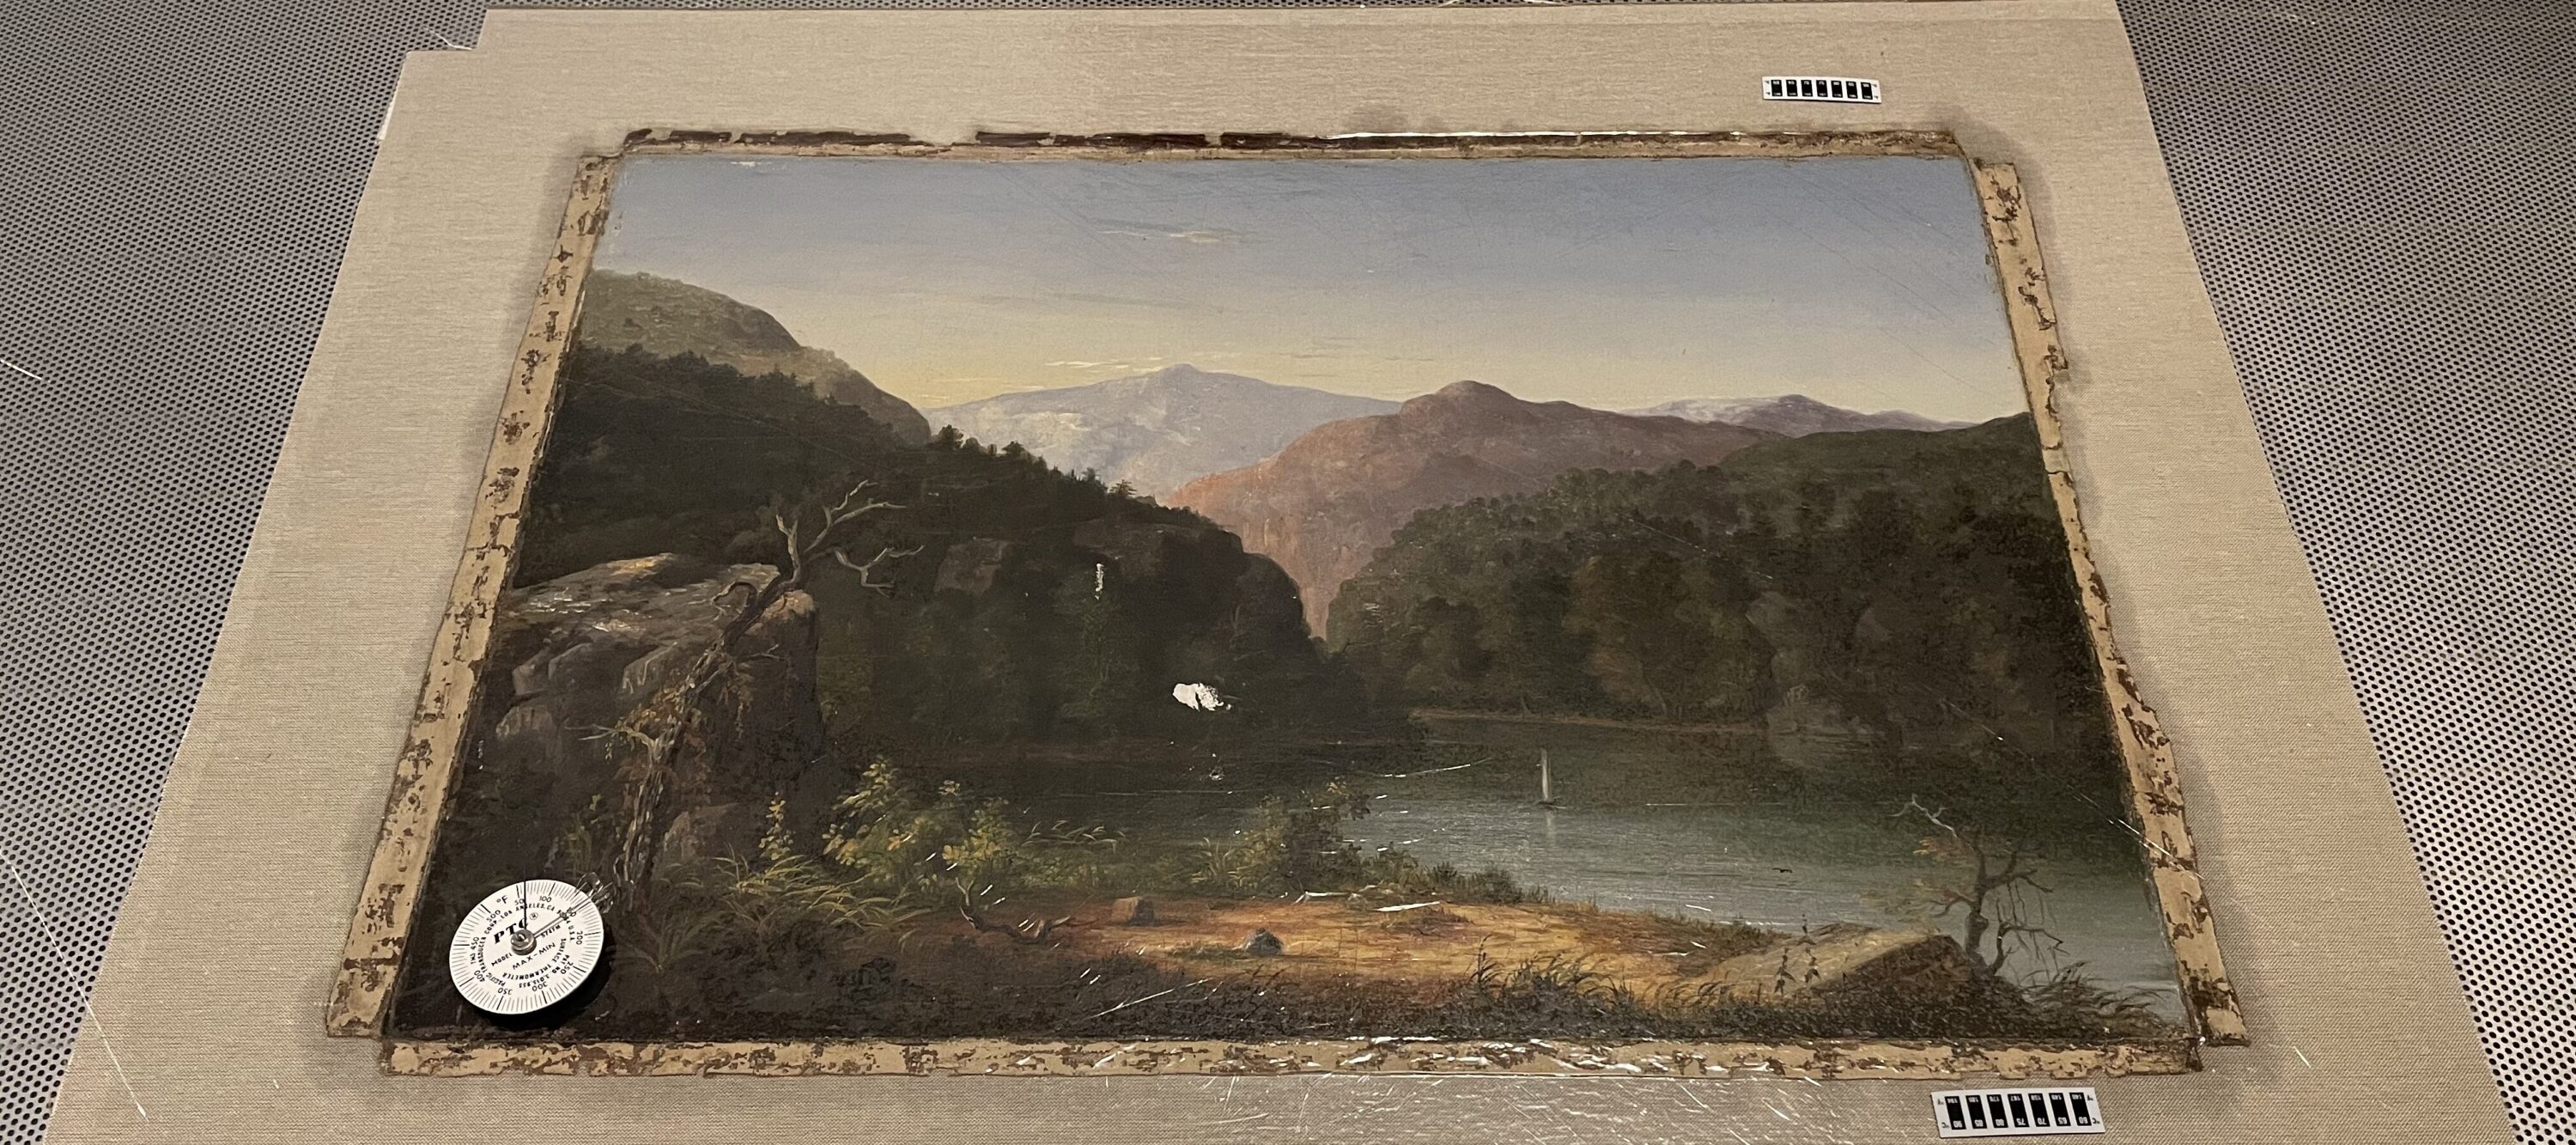 An oil painting of a mountainous landscape with a river cutting through it is laid on sterile table and prepared for conservation. A compass its in the lower left corner of the painting.